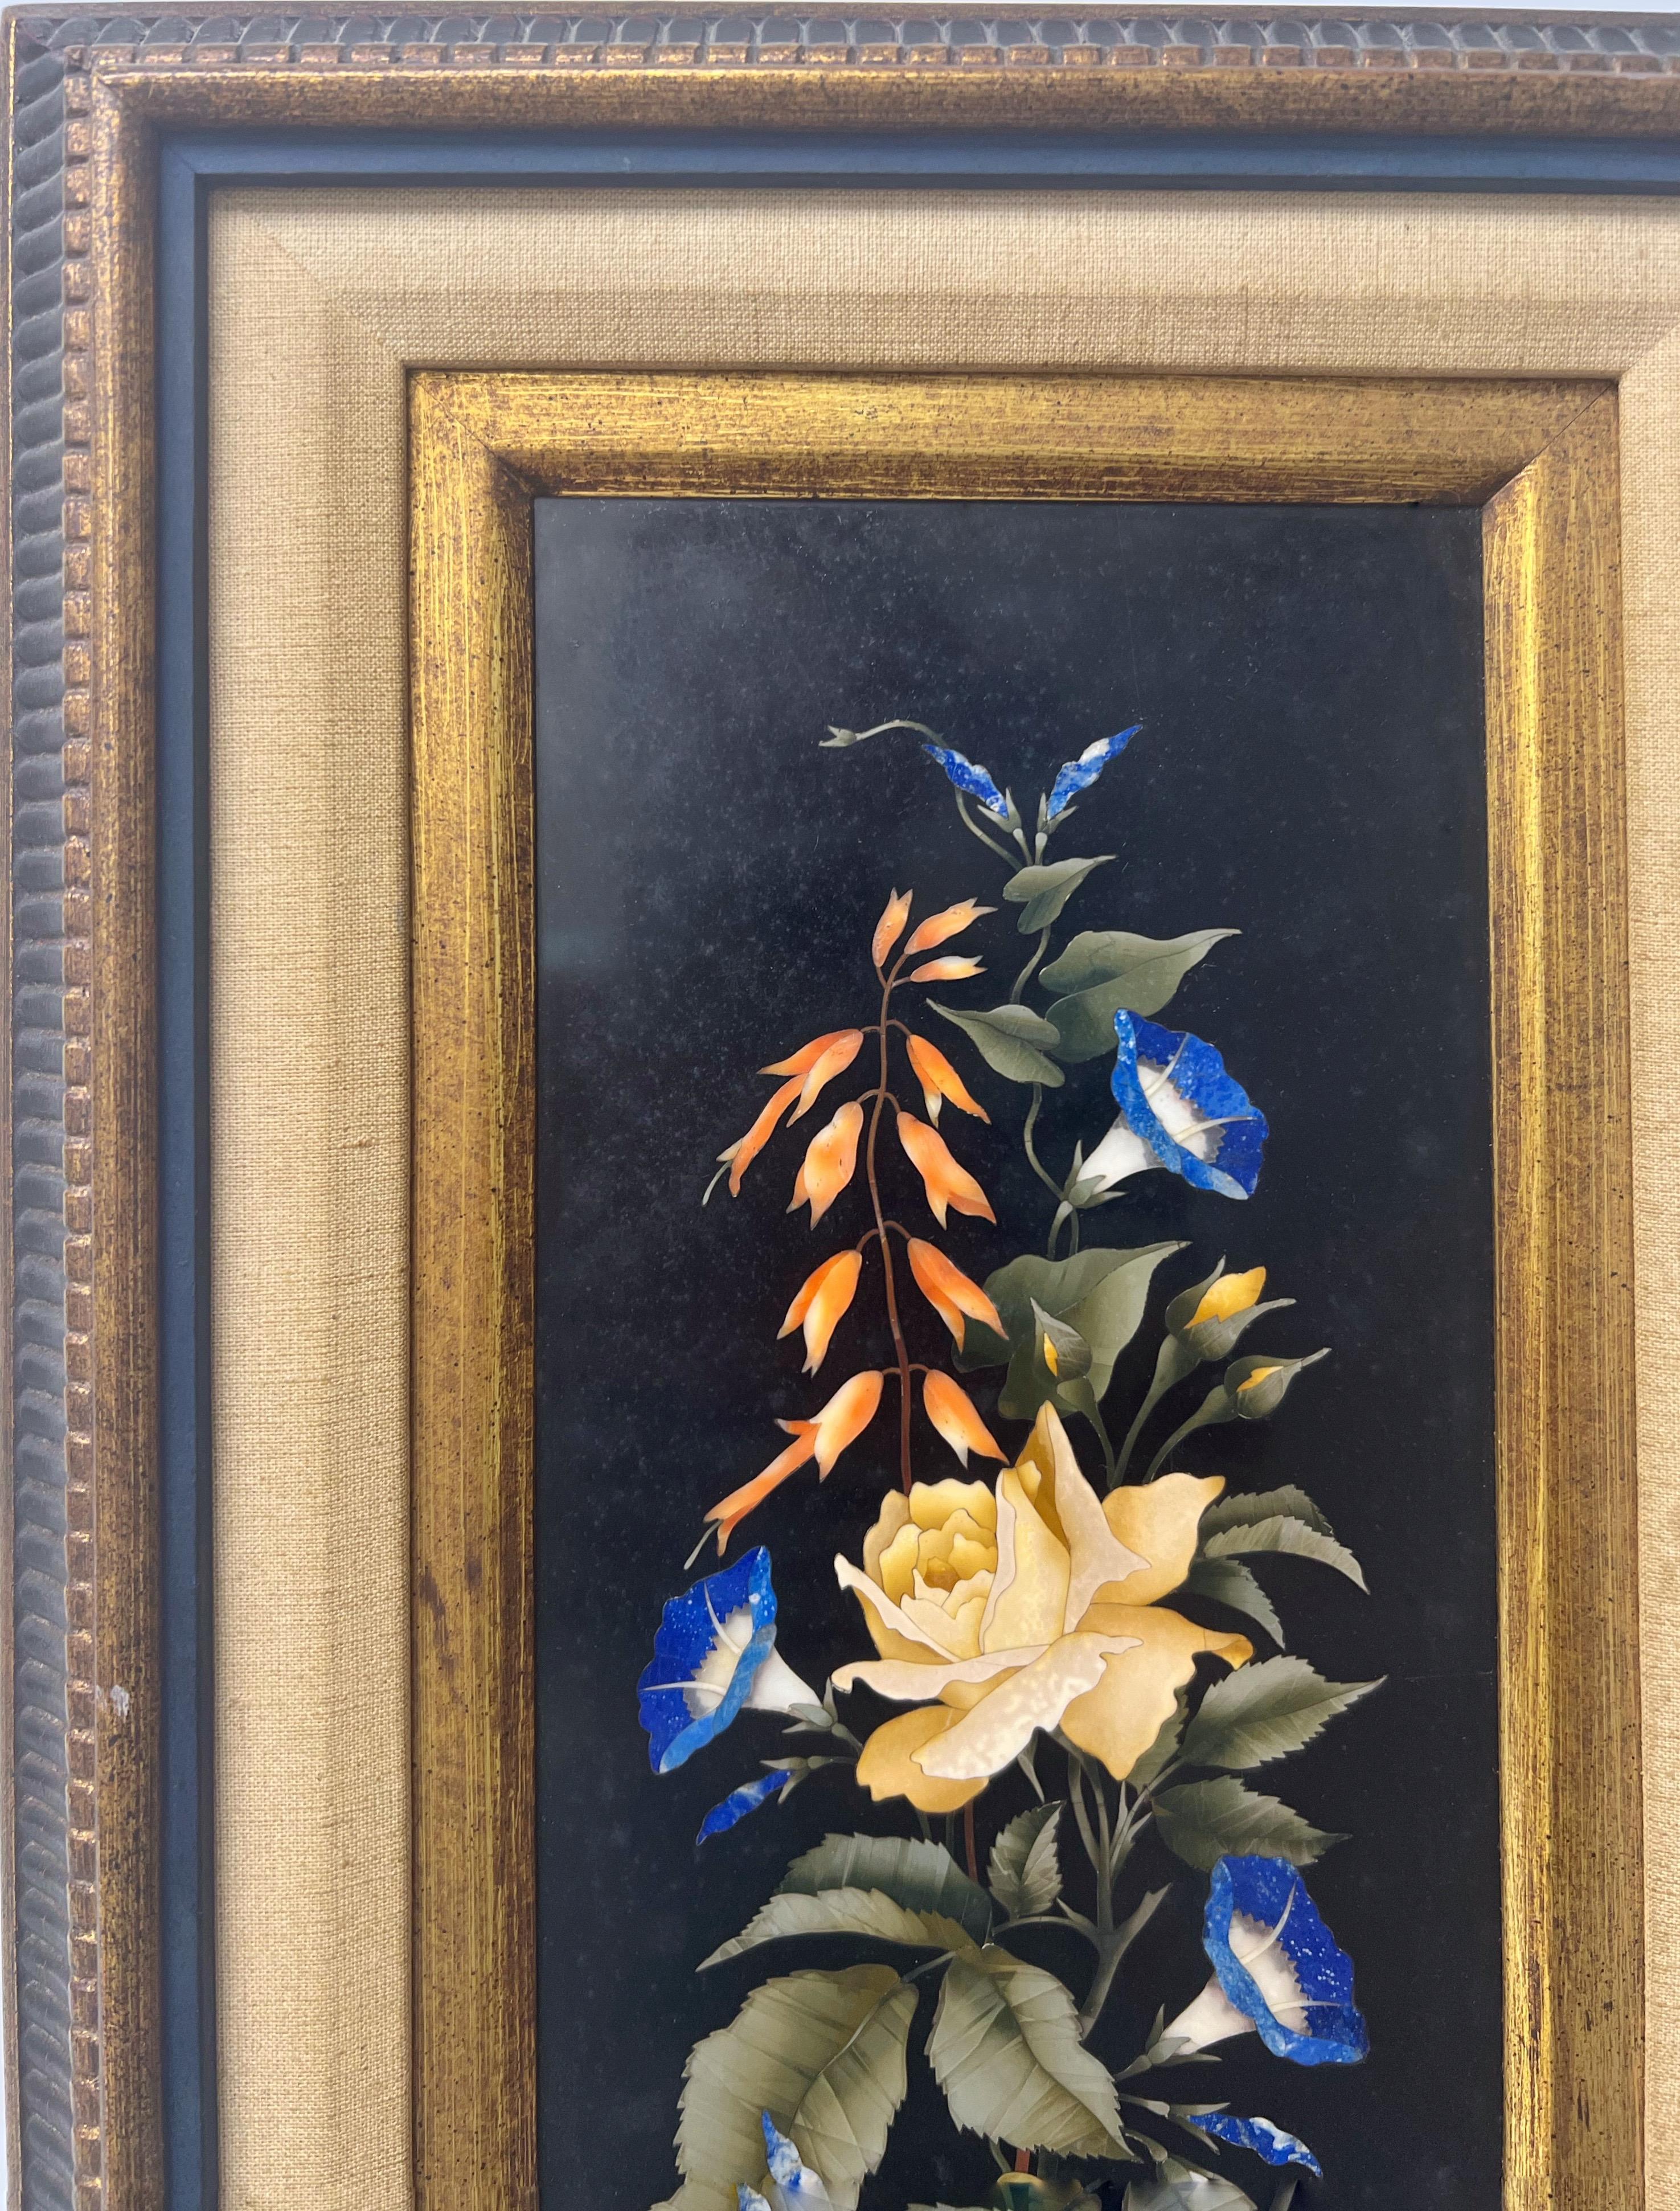 A large pietra dura plaque depicting flowers in a natural arrangement. The detail is exquisite. The natural coloration and tones of the stones have been used to achieve a realistic effect with depth and volume. plaque itself is 14.5